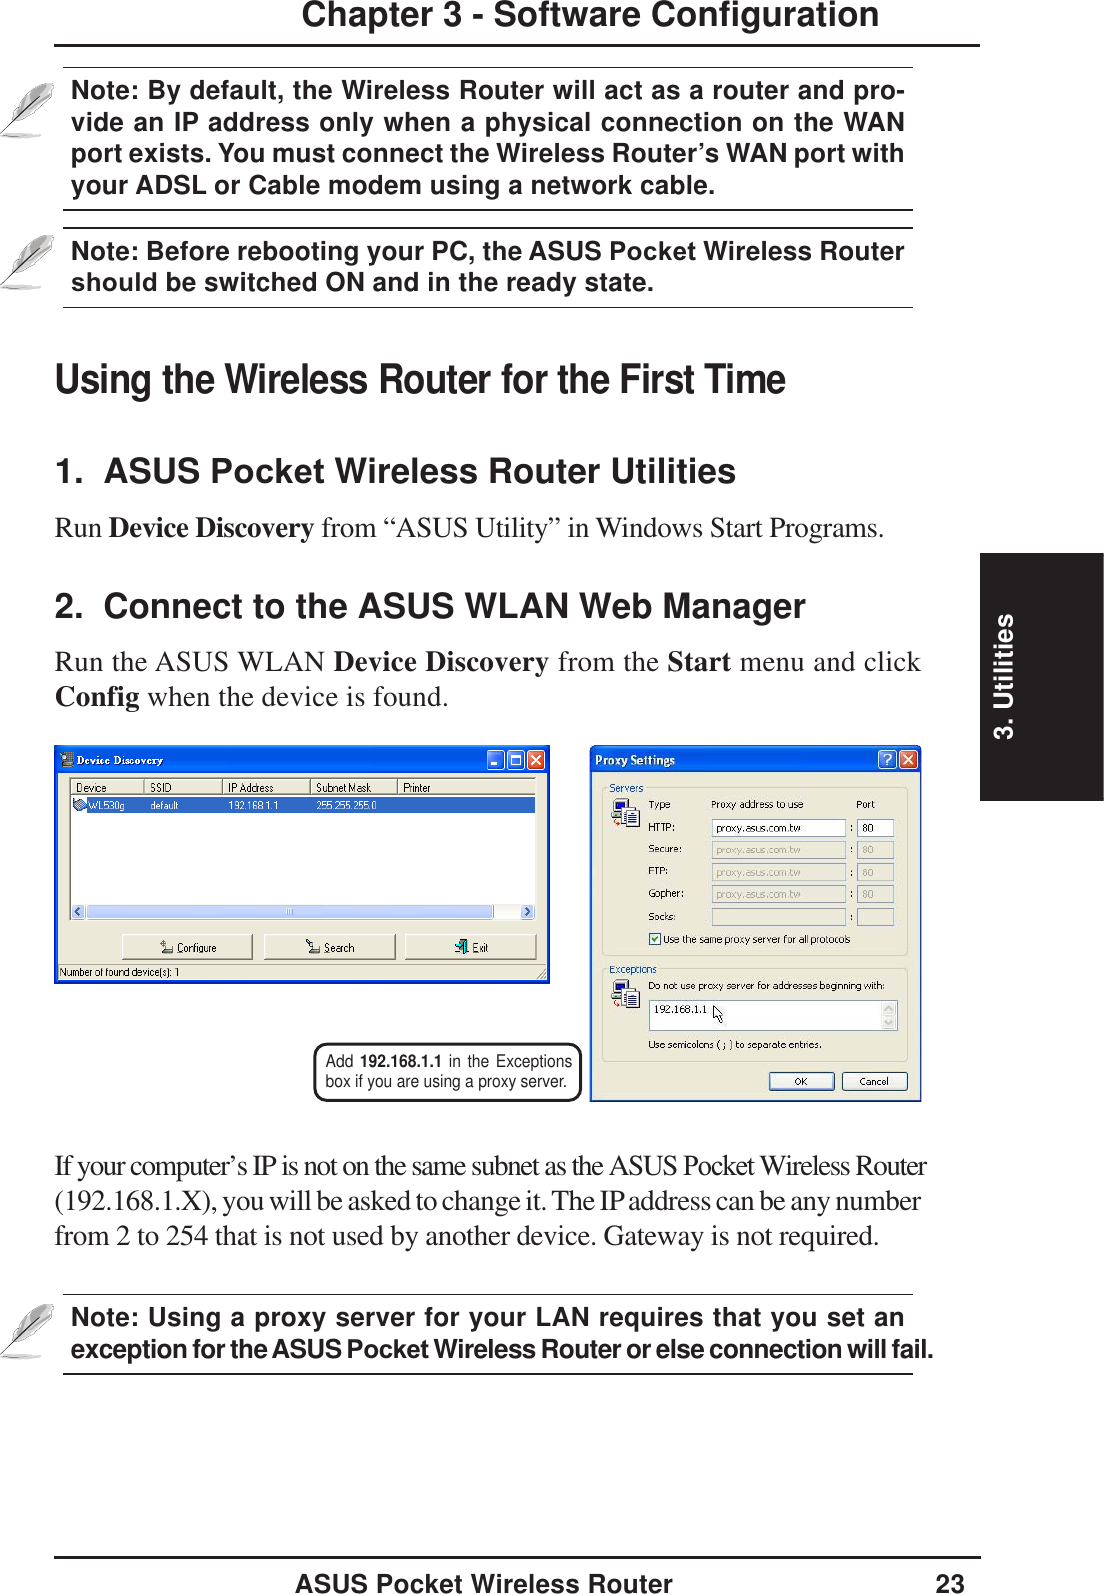 3. UtilitiesASUS Pocket Wireless Router 23Chapter 3 - Software ConfigurationUsing the Wireless Router for the First Time1.  ASUS Pocket Wireless Router UtilitiesRun Device Discovery from “ASUS Utility” in Windows Start Programs.2.  Connect to the ASUS WLAN Web ManagerRun the ASUS WLAN Device Discovery from the Start menu and clickConfig when the device is found.If your computer’s IP is not on the same subnet as the ASUS Pocket Wireless Router(192.168.1.X), you will be asked to change it. The IP address can be any numberfrom 2 to 254 that is not used by another device. Gateway is not required.Add 192.168.1.1 in the Exceptionsbox if you are using a proxy server.Note: Using a proxy server for your LAN requires that you set anexception for theASUS Pocket Wireless Router or else connection will fail.Note: By default, the Wireless Router will act as a router and pro-vide an IP address only when a physical connection on the WANport exists. You must connect the Wireless Router’s WAN port withyour ADSL or Cable modem using a network cable.Note: Before rebooting your PC, the ASUS Pocket Wireless Router should be switched ON and in the ready state.